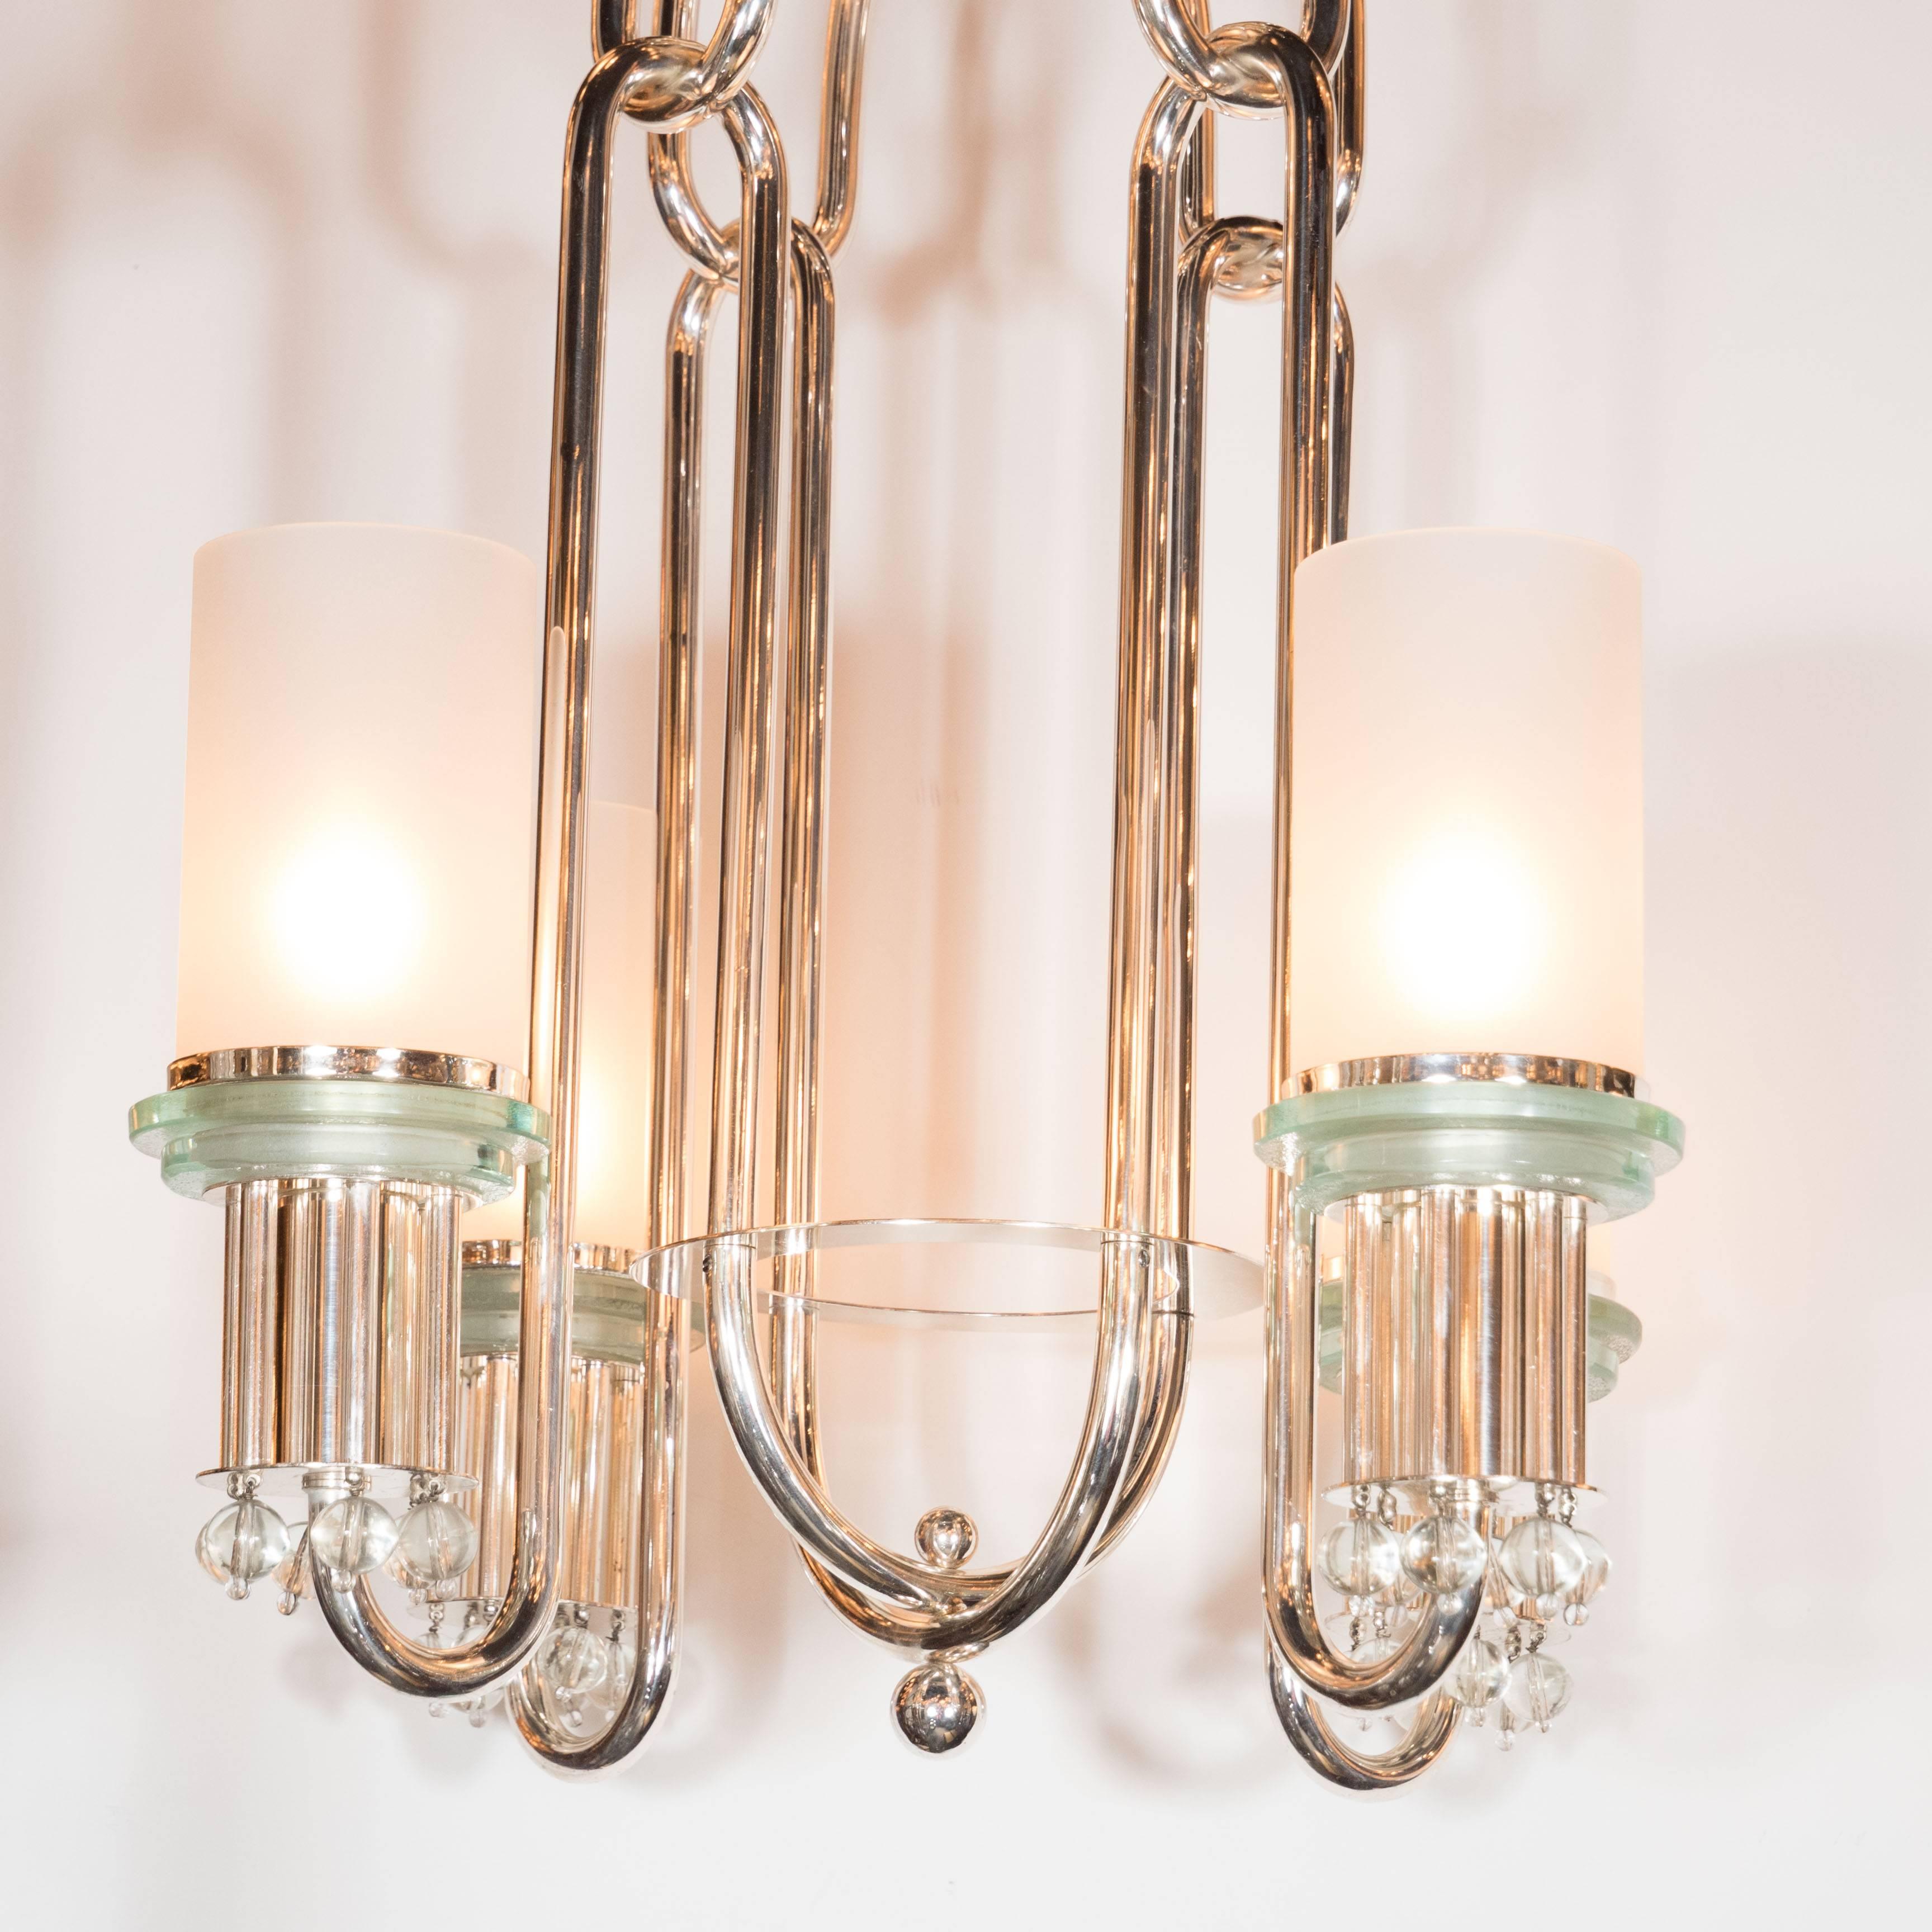 An elegant Art Deco nickeled bronze sculptural chandelier with cylindrical frosted glass shades, France, circa 1930.
This machine age inspired chandelier features four frosted cylindrical glass shades on a stepped frosted cylindrial glass support,